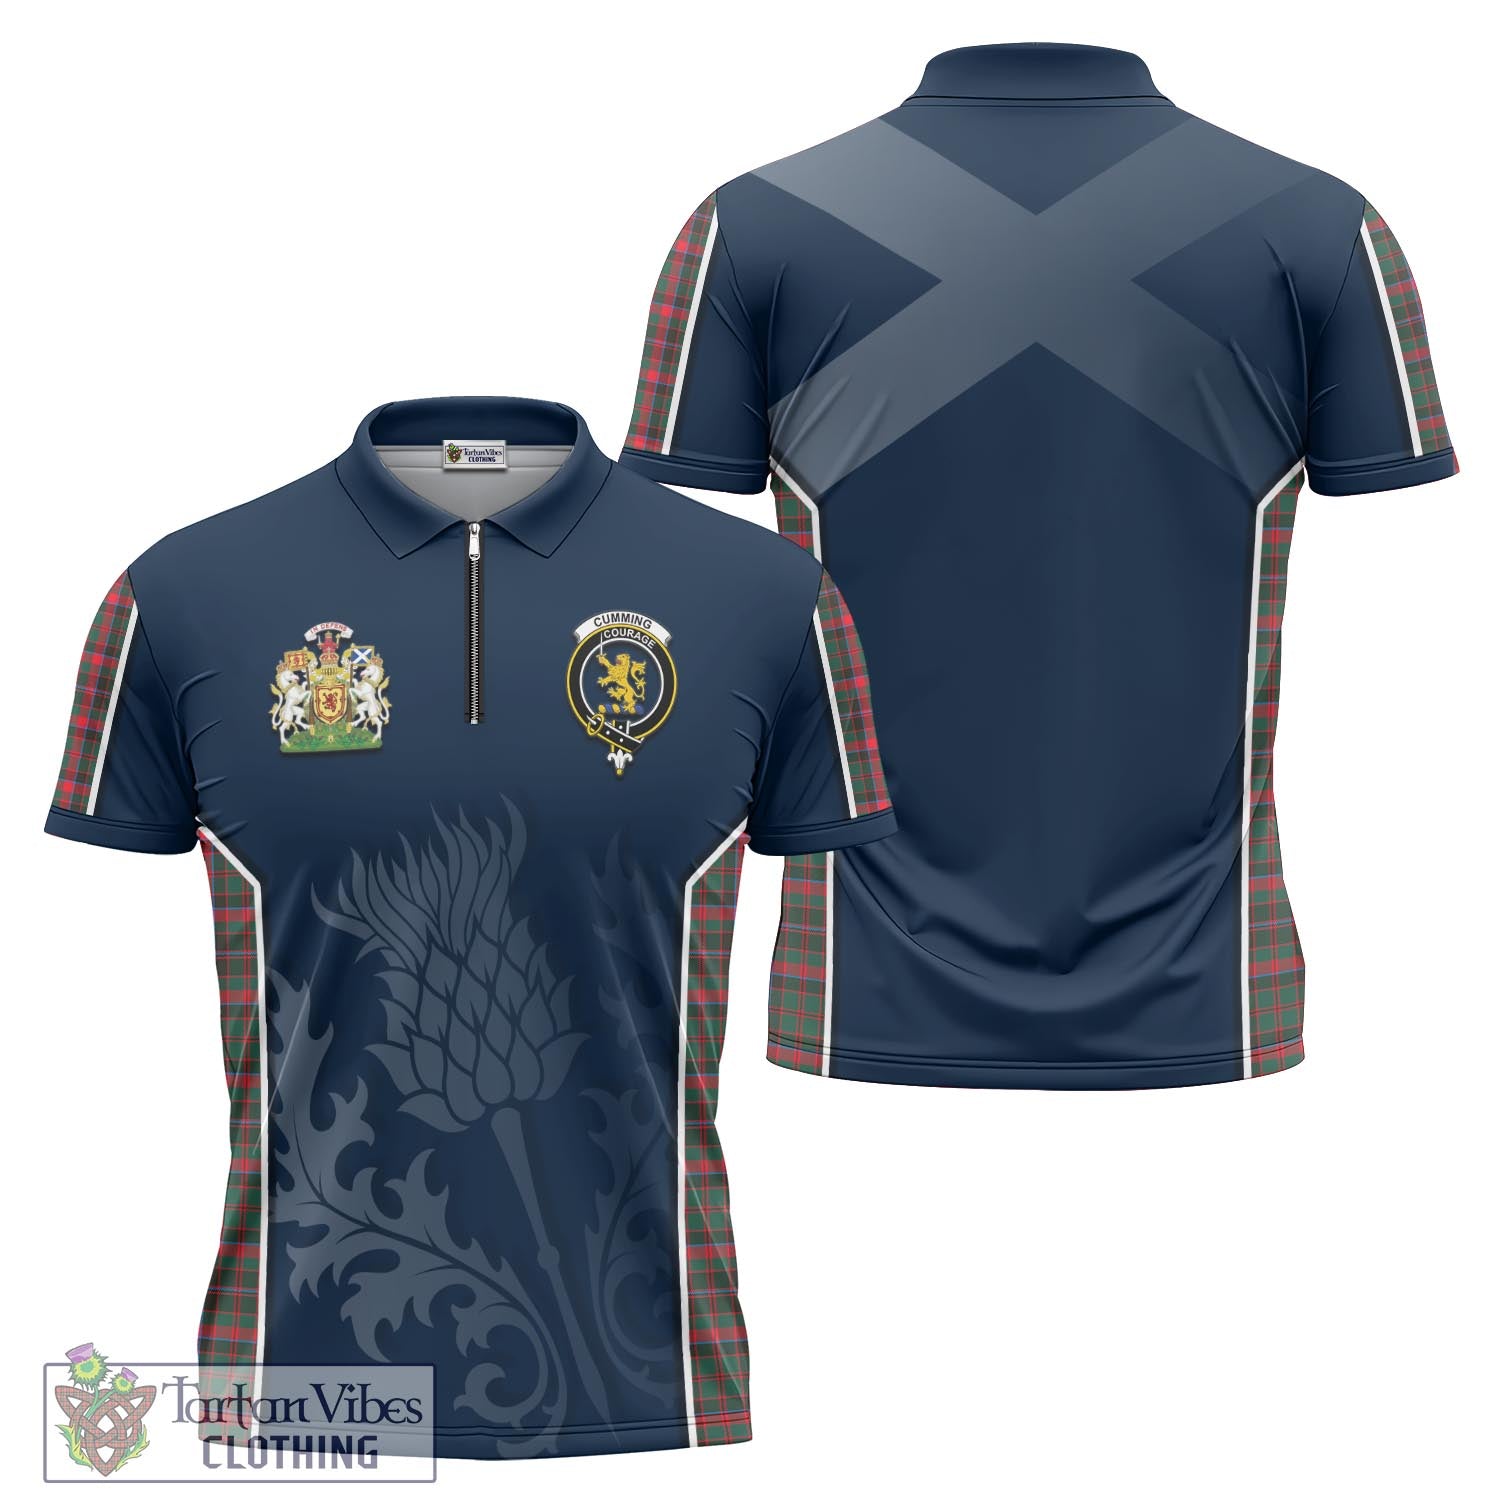 Tartan Vibes Clothing Cumming Hunting Modern Tartan Zipper Polo Shirt with Family Crest and Scottish Thistle Vibes Sport Style